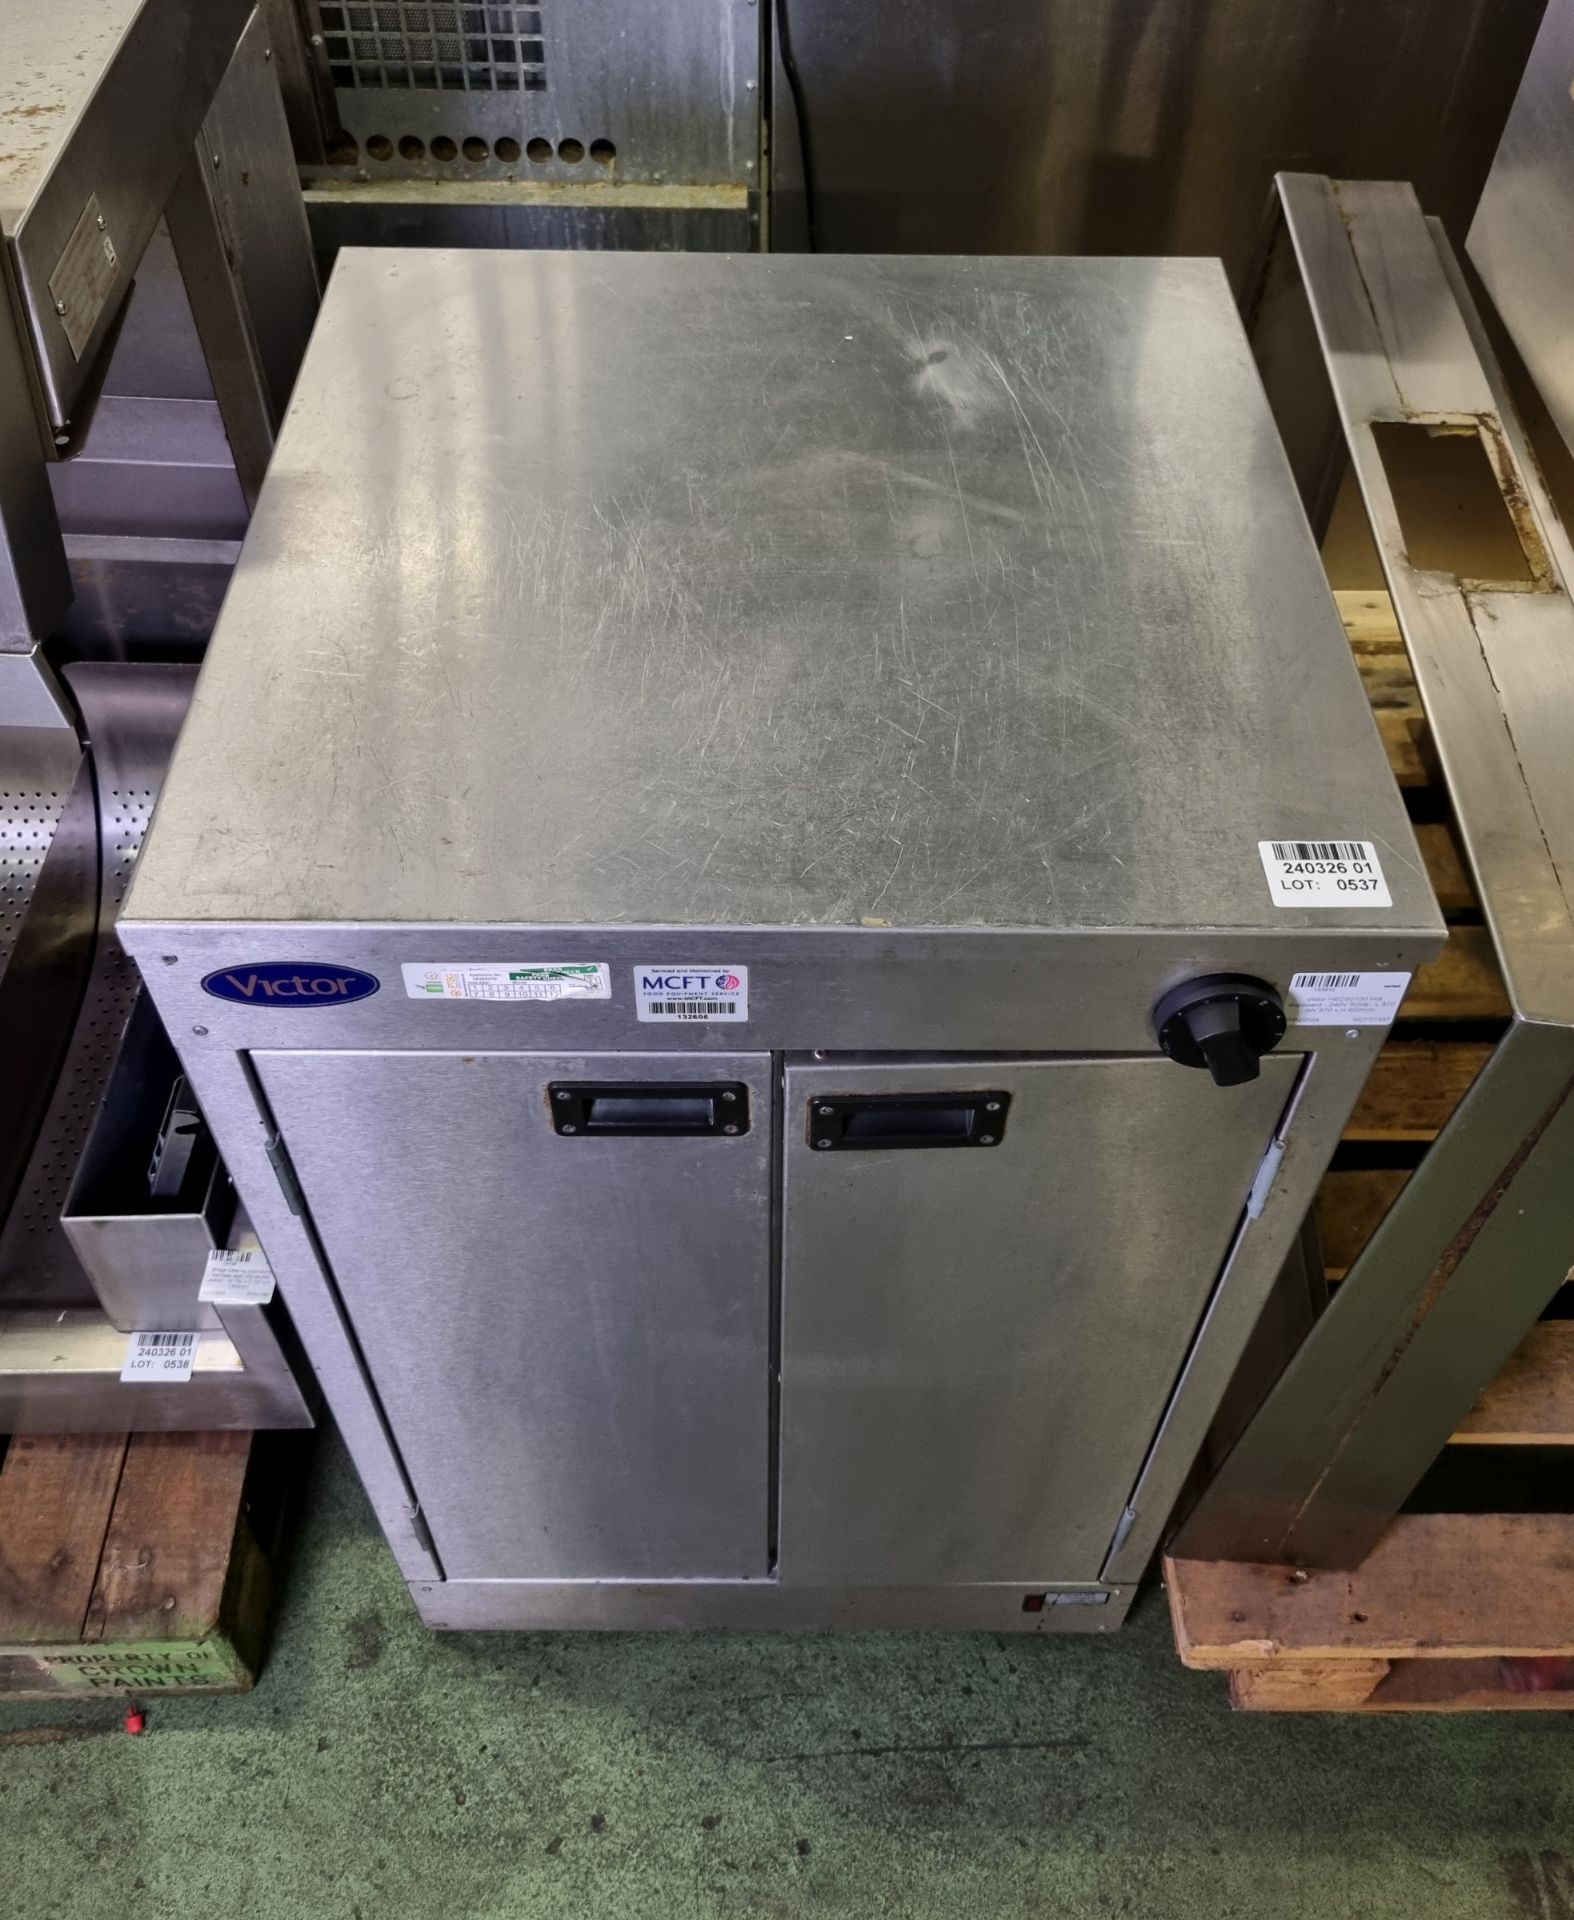 Victor HED30100 Hot cupboard - 240V - 50Hz - L 570 x W 570 x H 900mm - Image 2 of 4